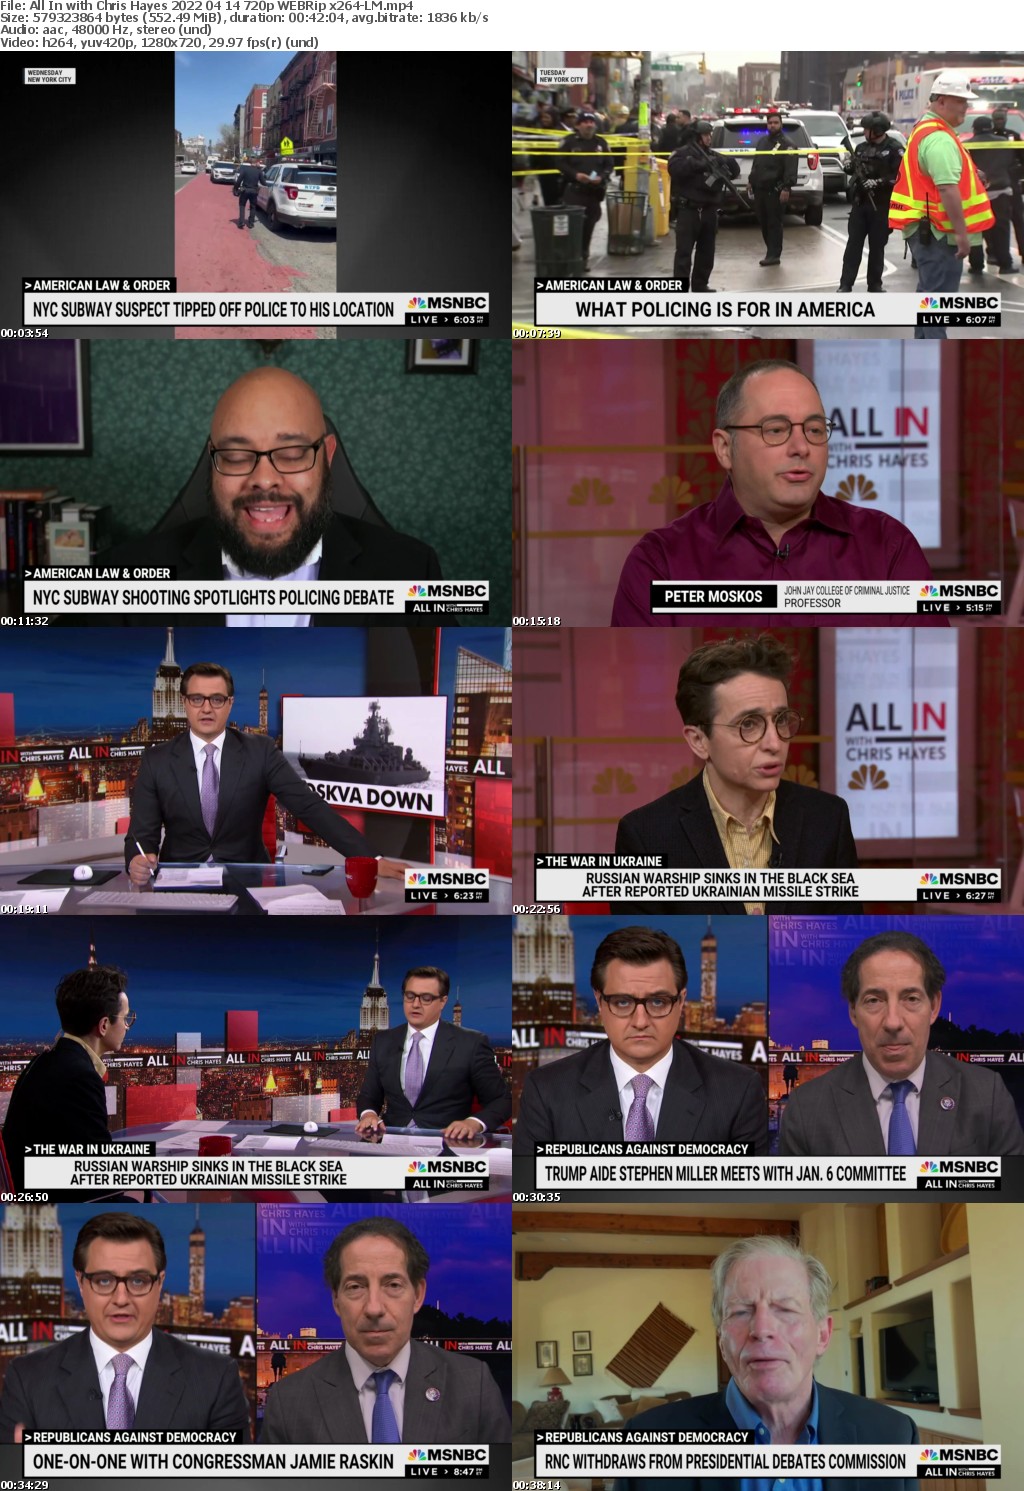 All In with Chris Hayes 2022 04 14 720p WEBRip x264-LM